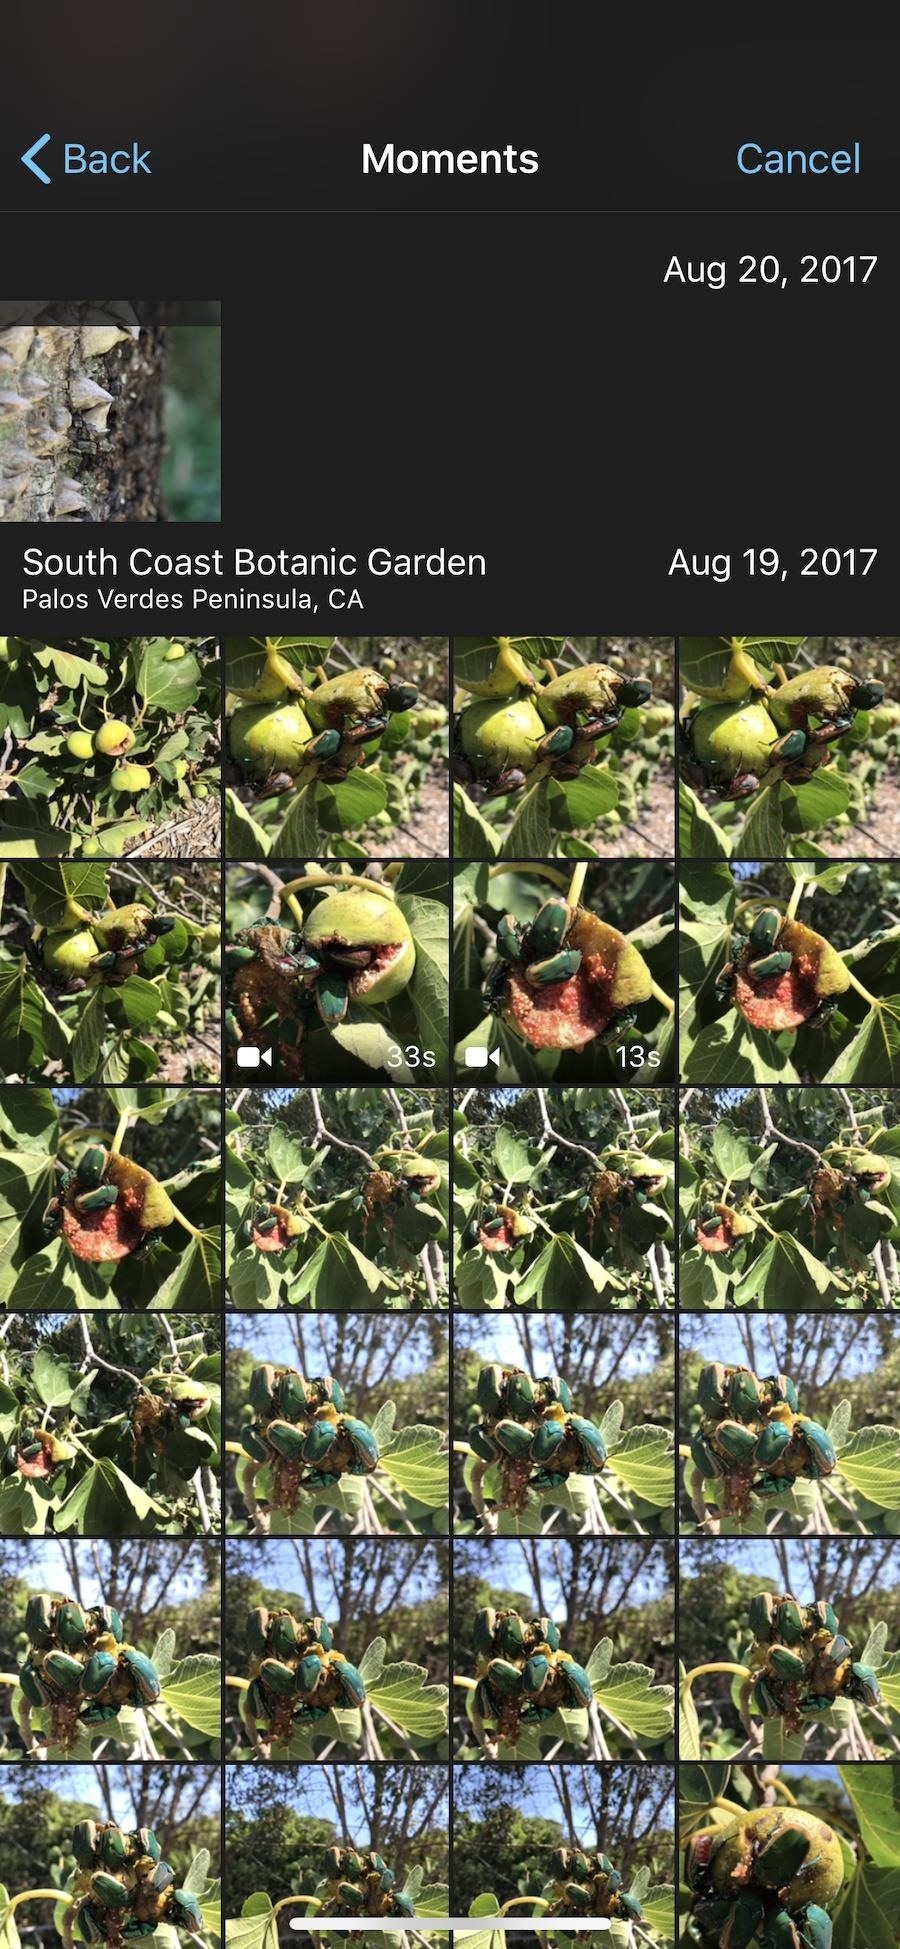 How to Add More Photos to iMovie Projects on Your iPhone